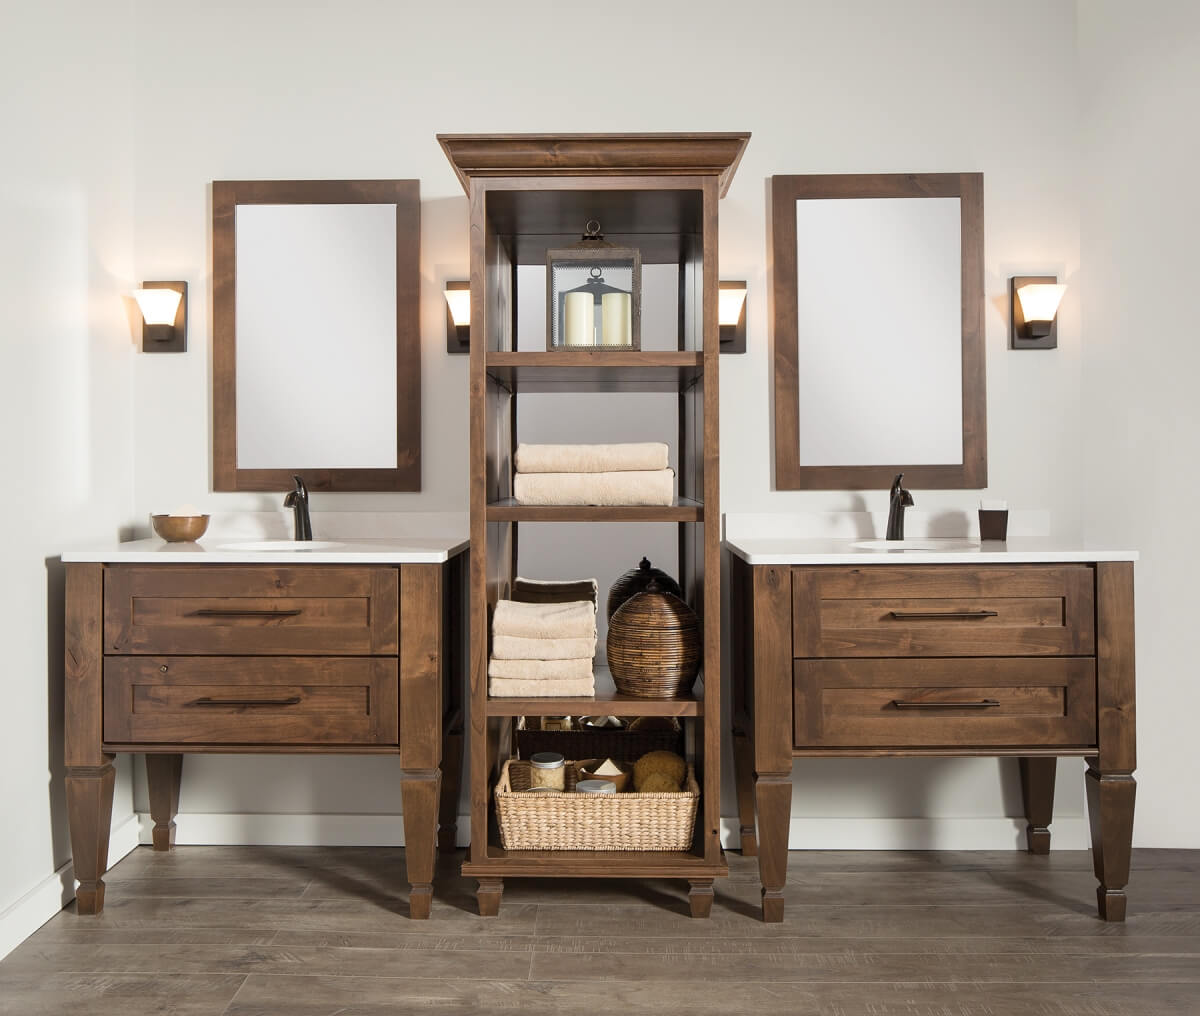 A master bathroom with double vanities featuring a tall freestanding linen cabinet with a mirror in the back of the cabinetry.